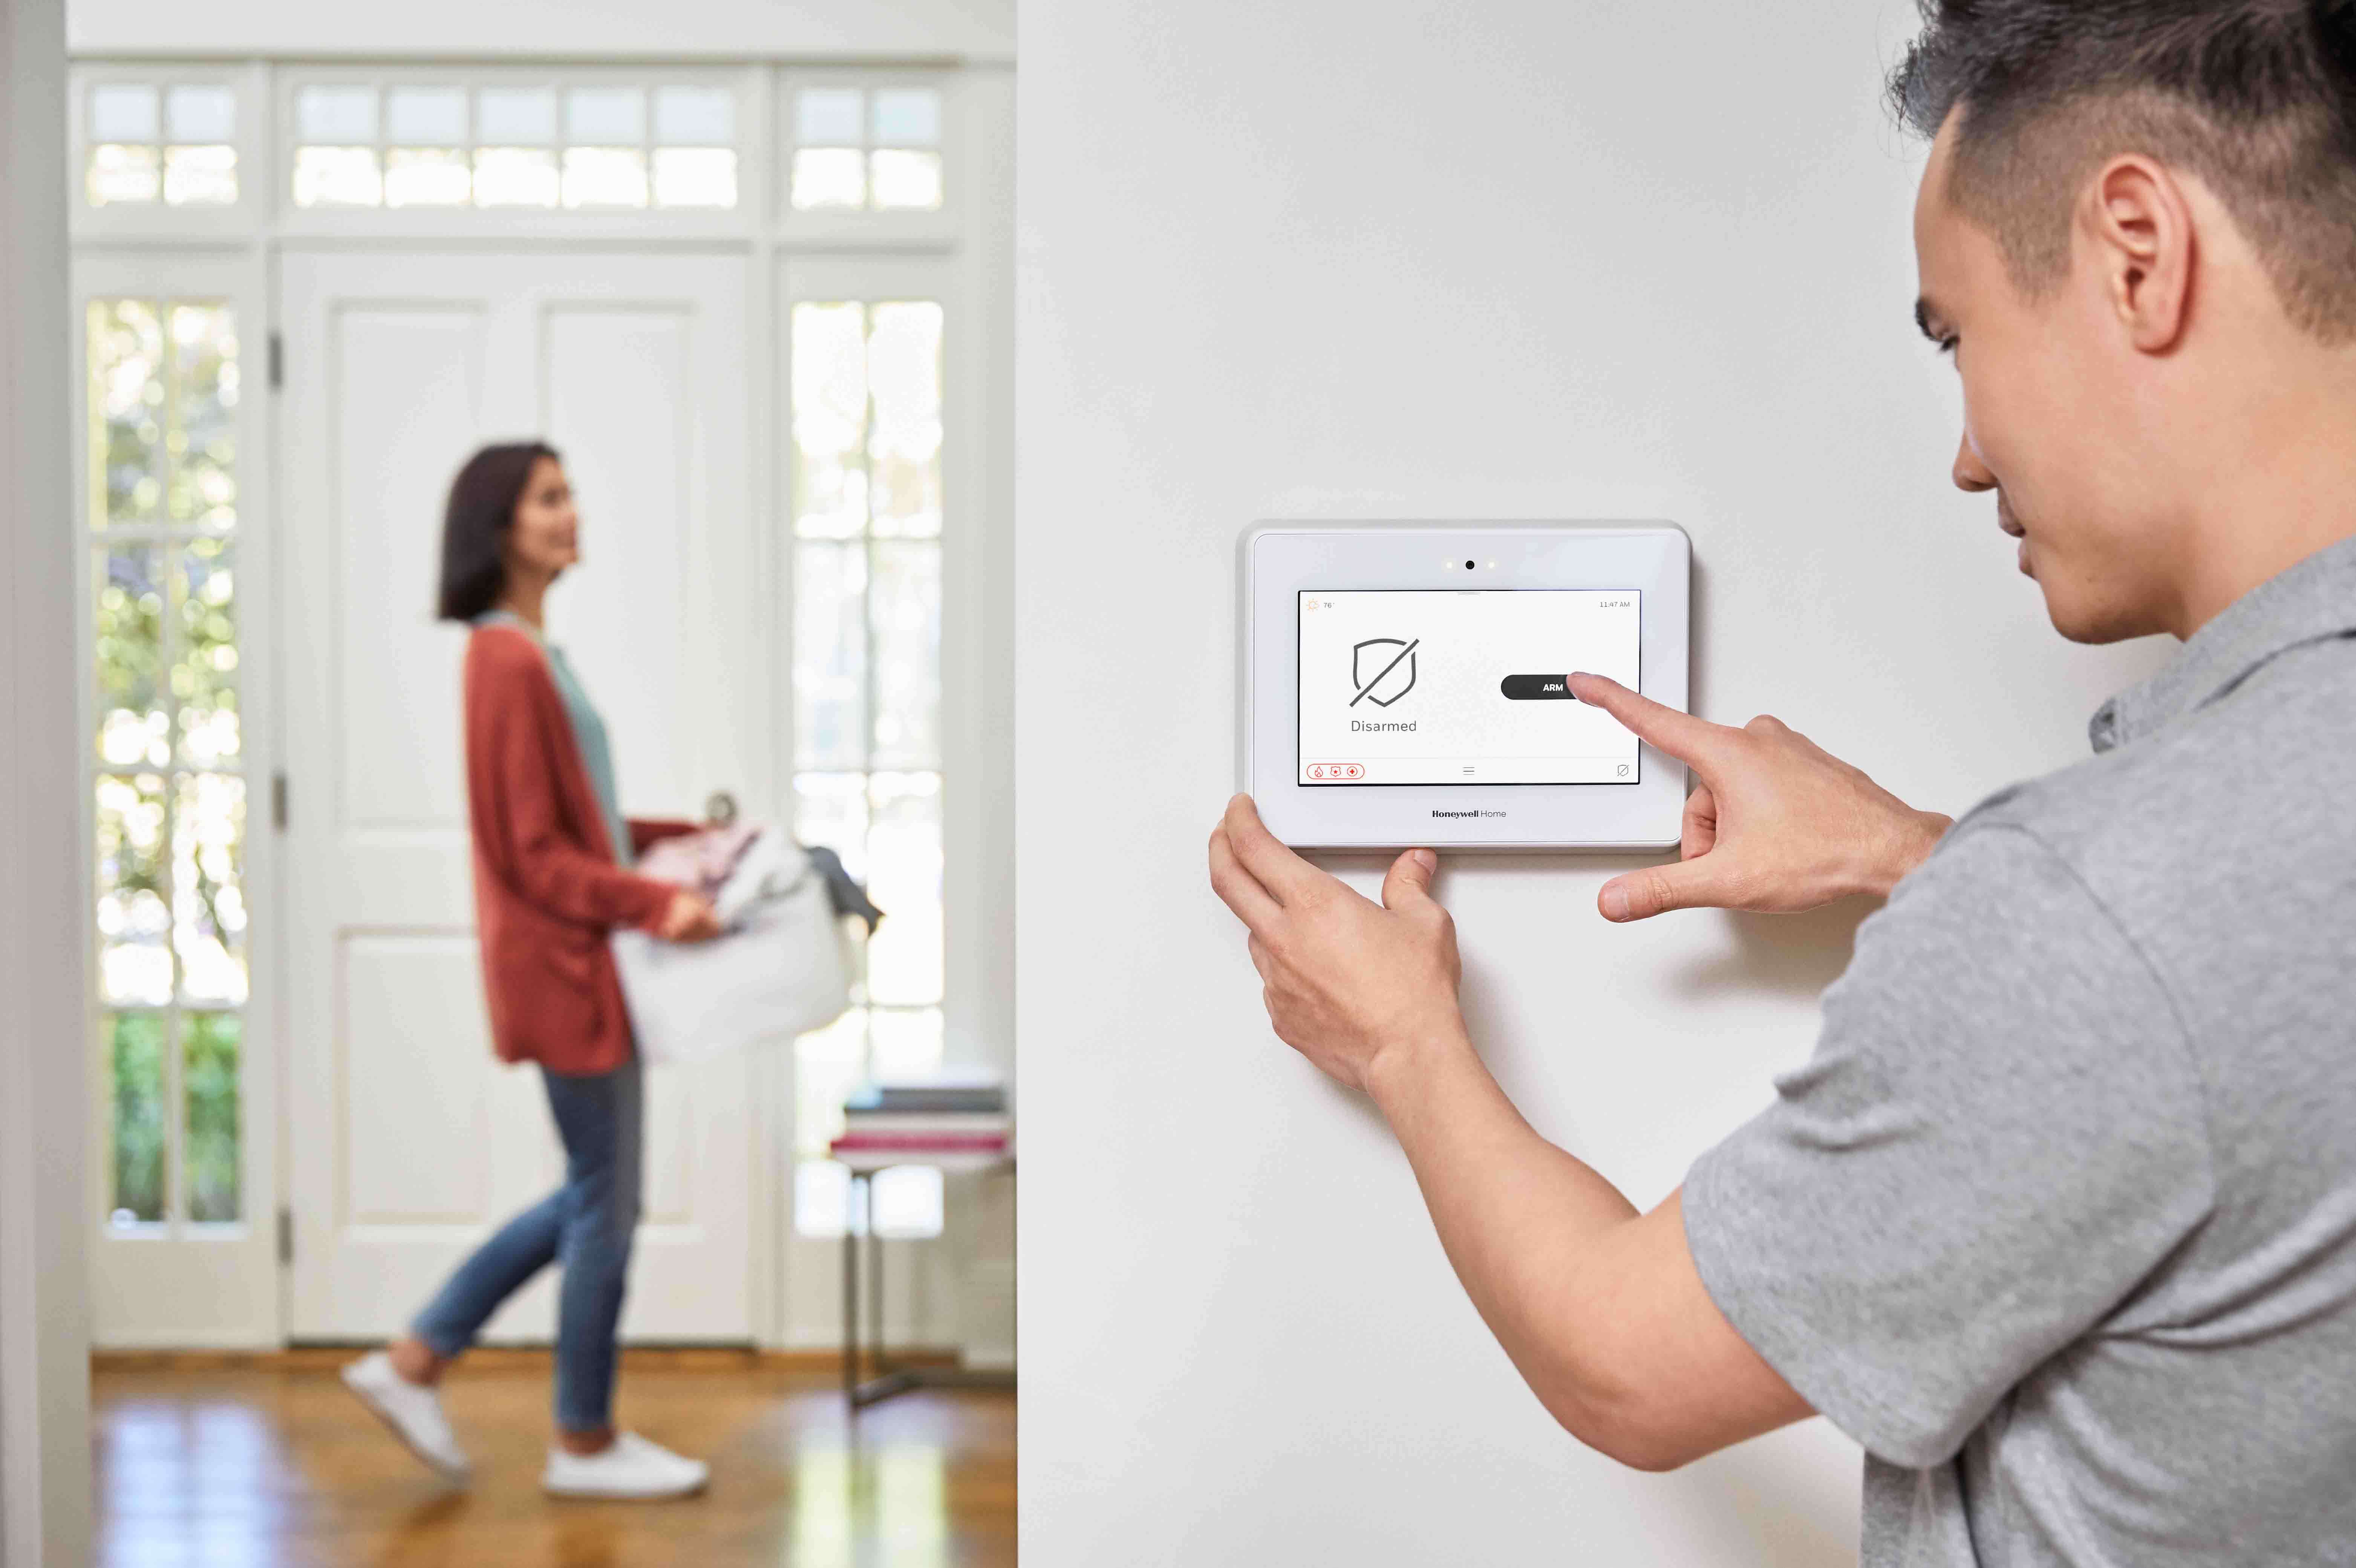 proffessional uses on-wall thermostat, with woman in background